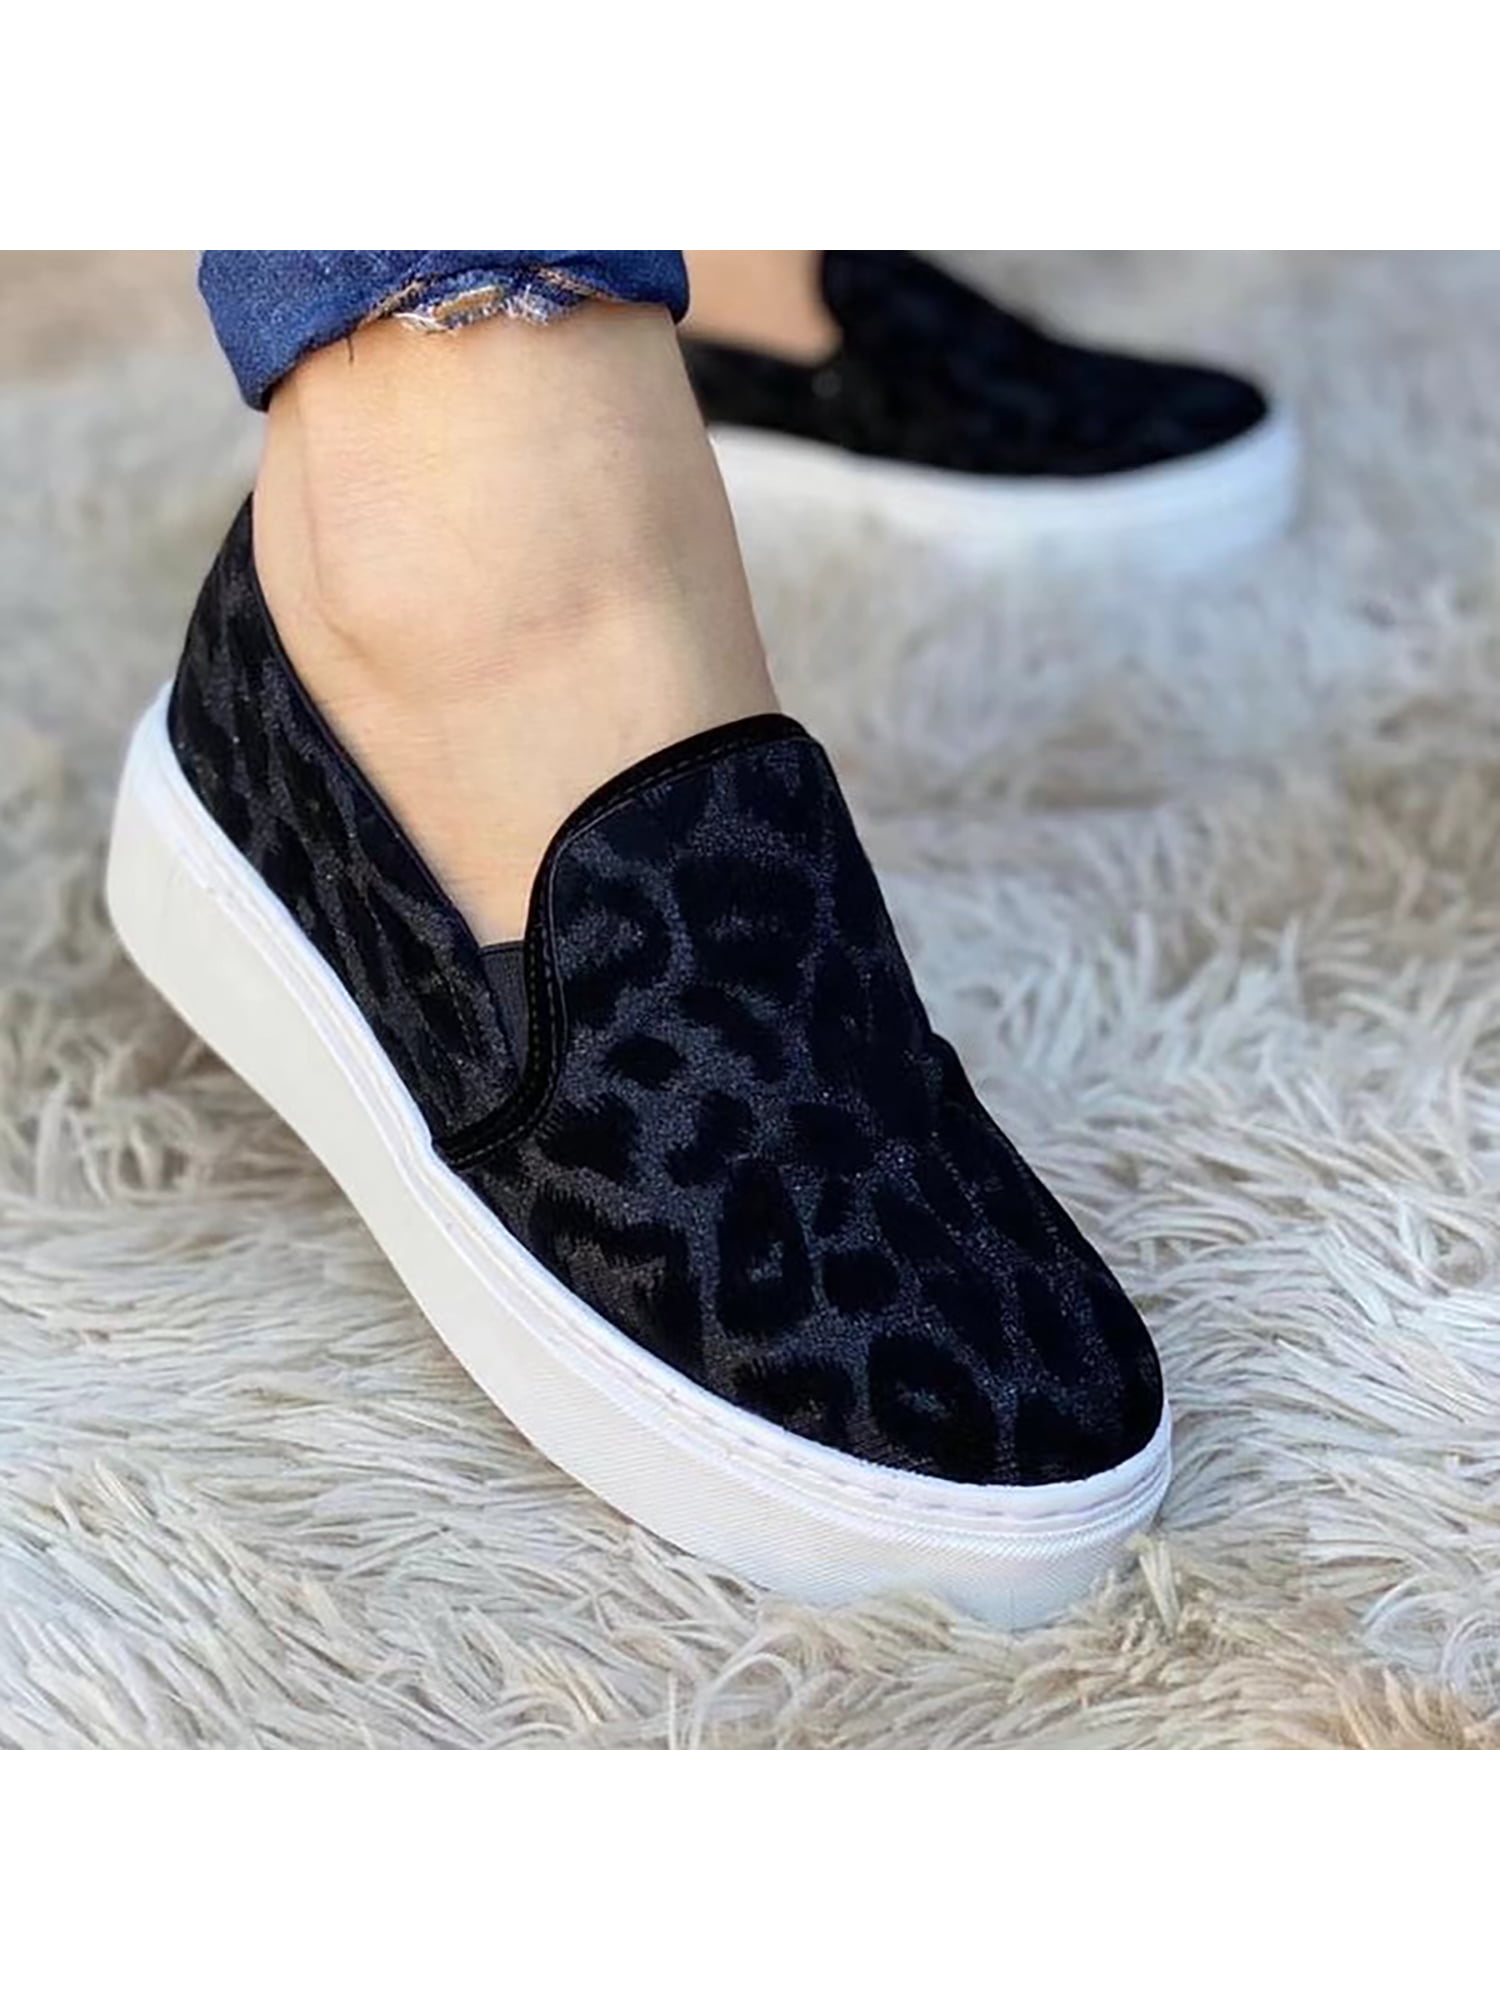 Urban Lifestyle Camera Lace Up Loafers Canvas Skate Shoes for Women Round Toe 